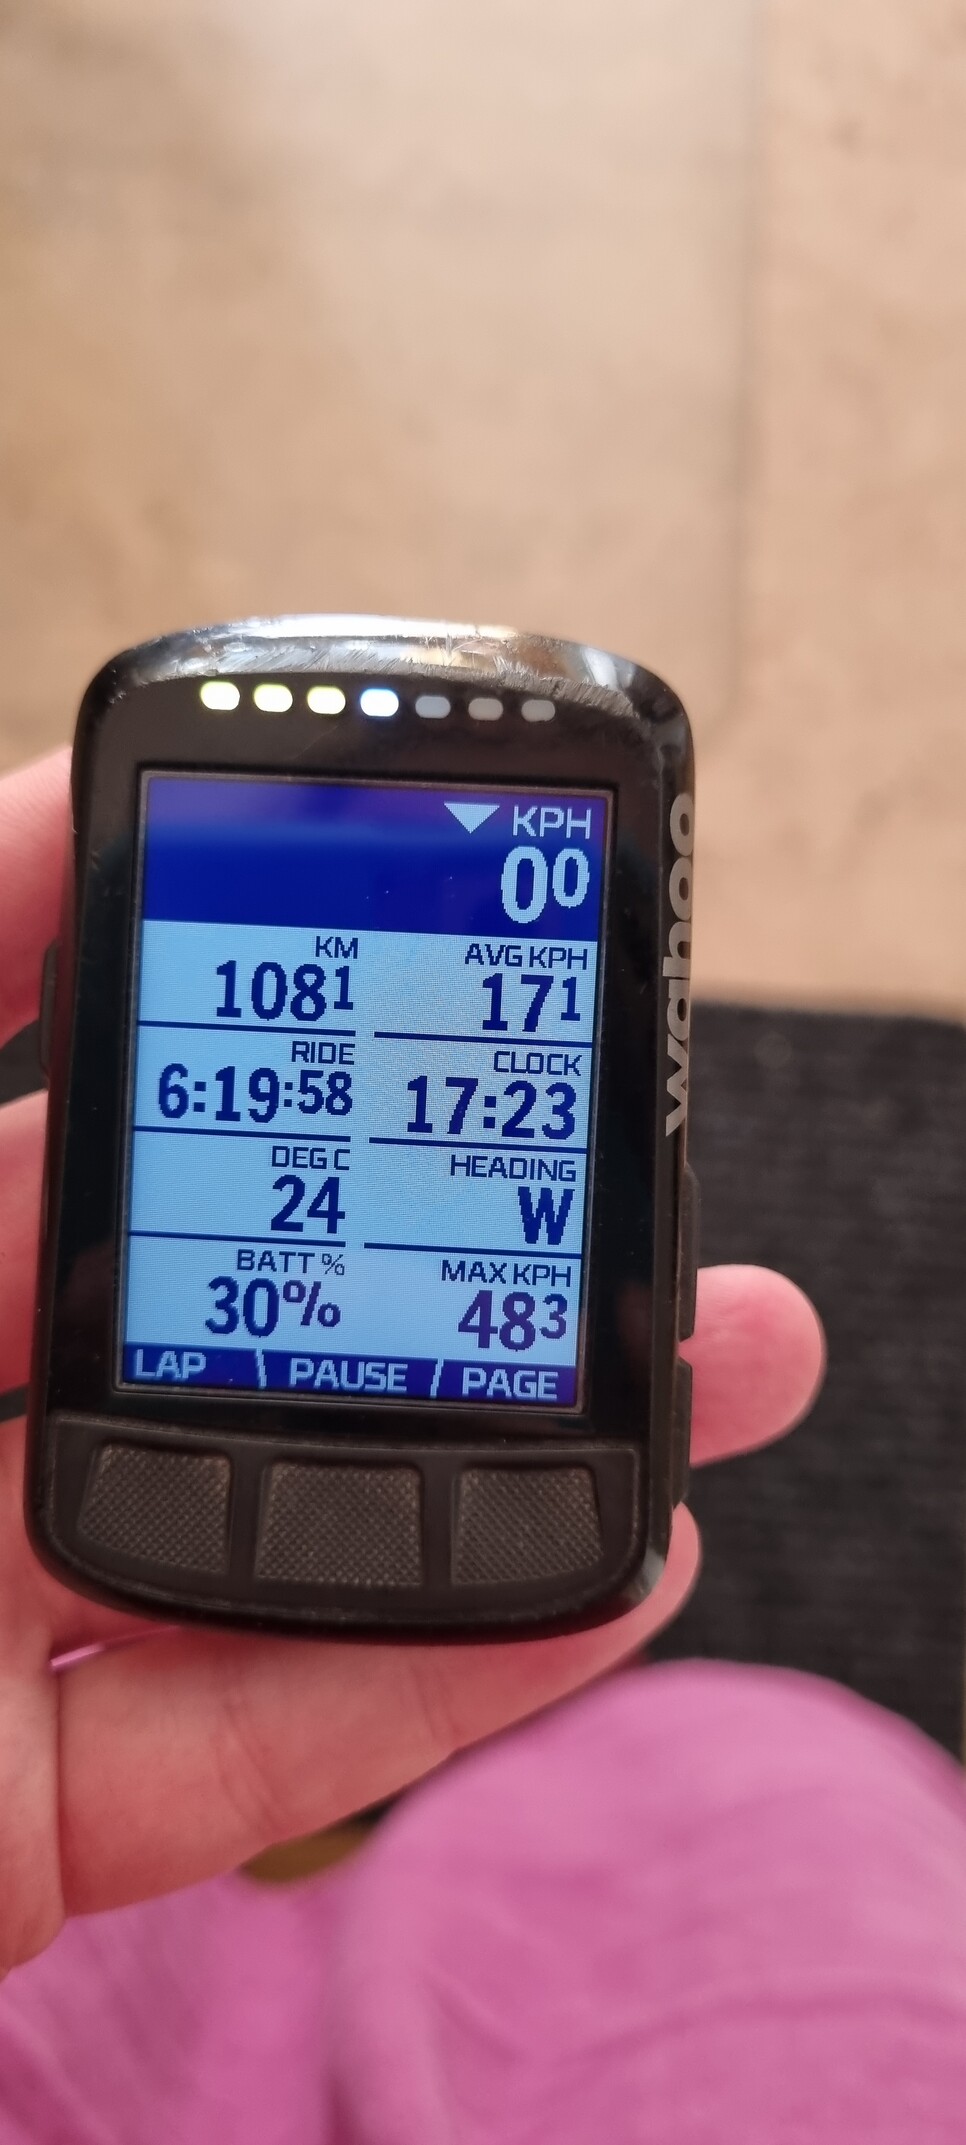 Bike computer in my hand showing 108km. at an average speed of 17,1 km/h.